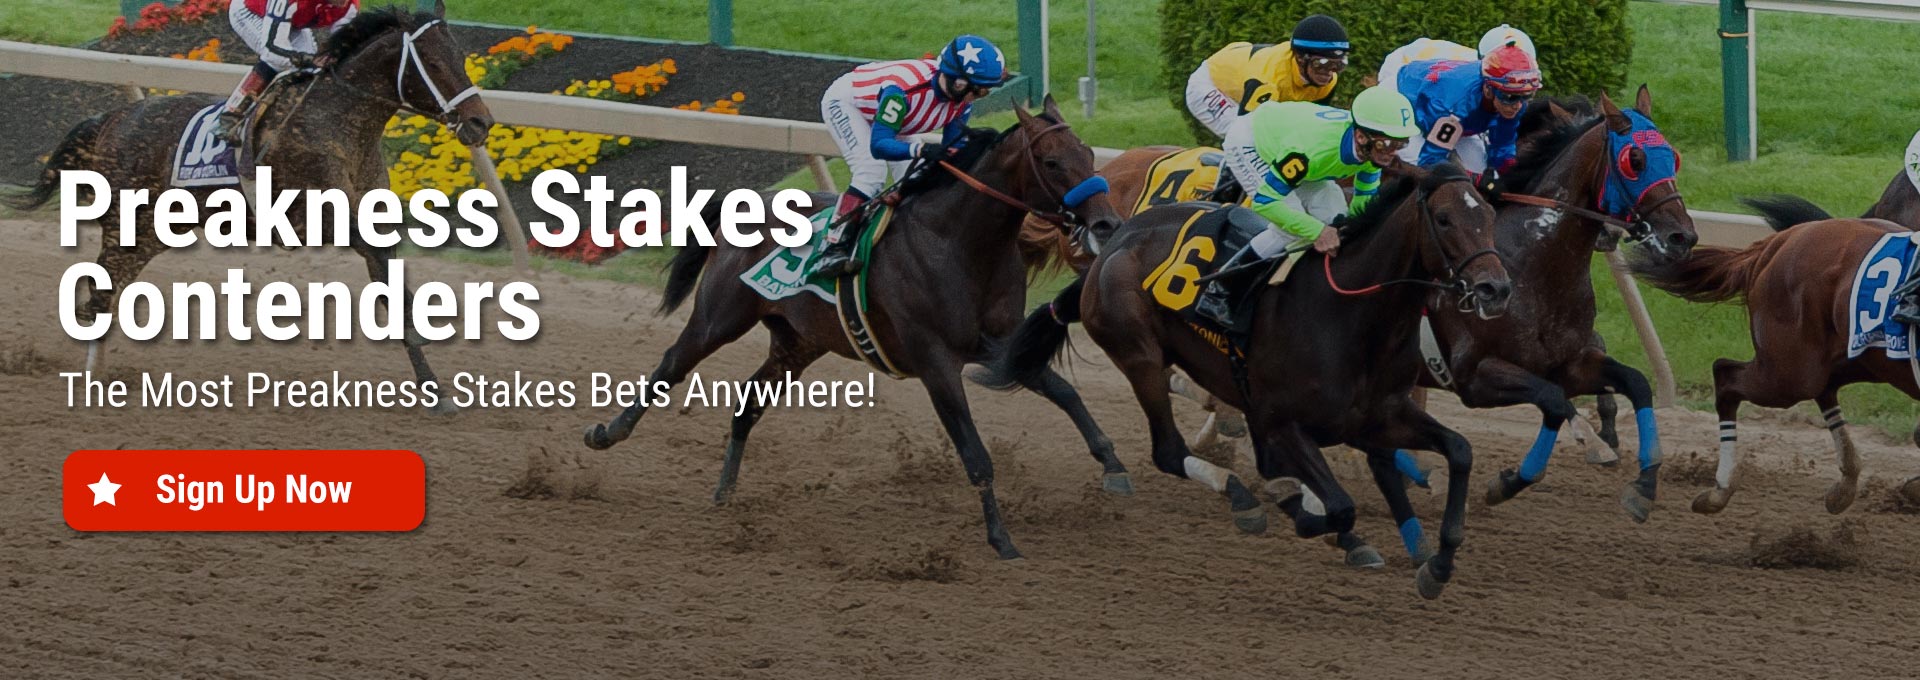 Preakness Stakes Contenders Online Horse Betting